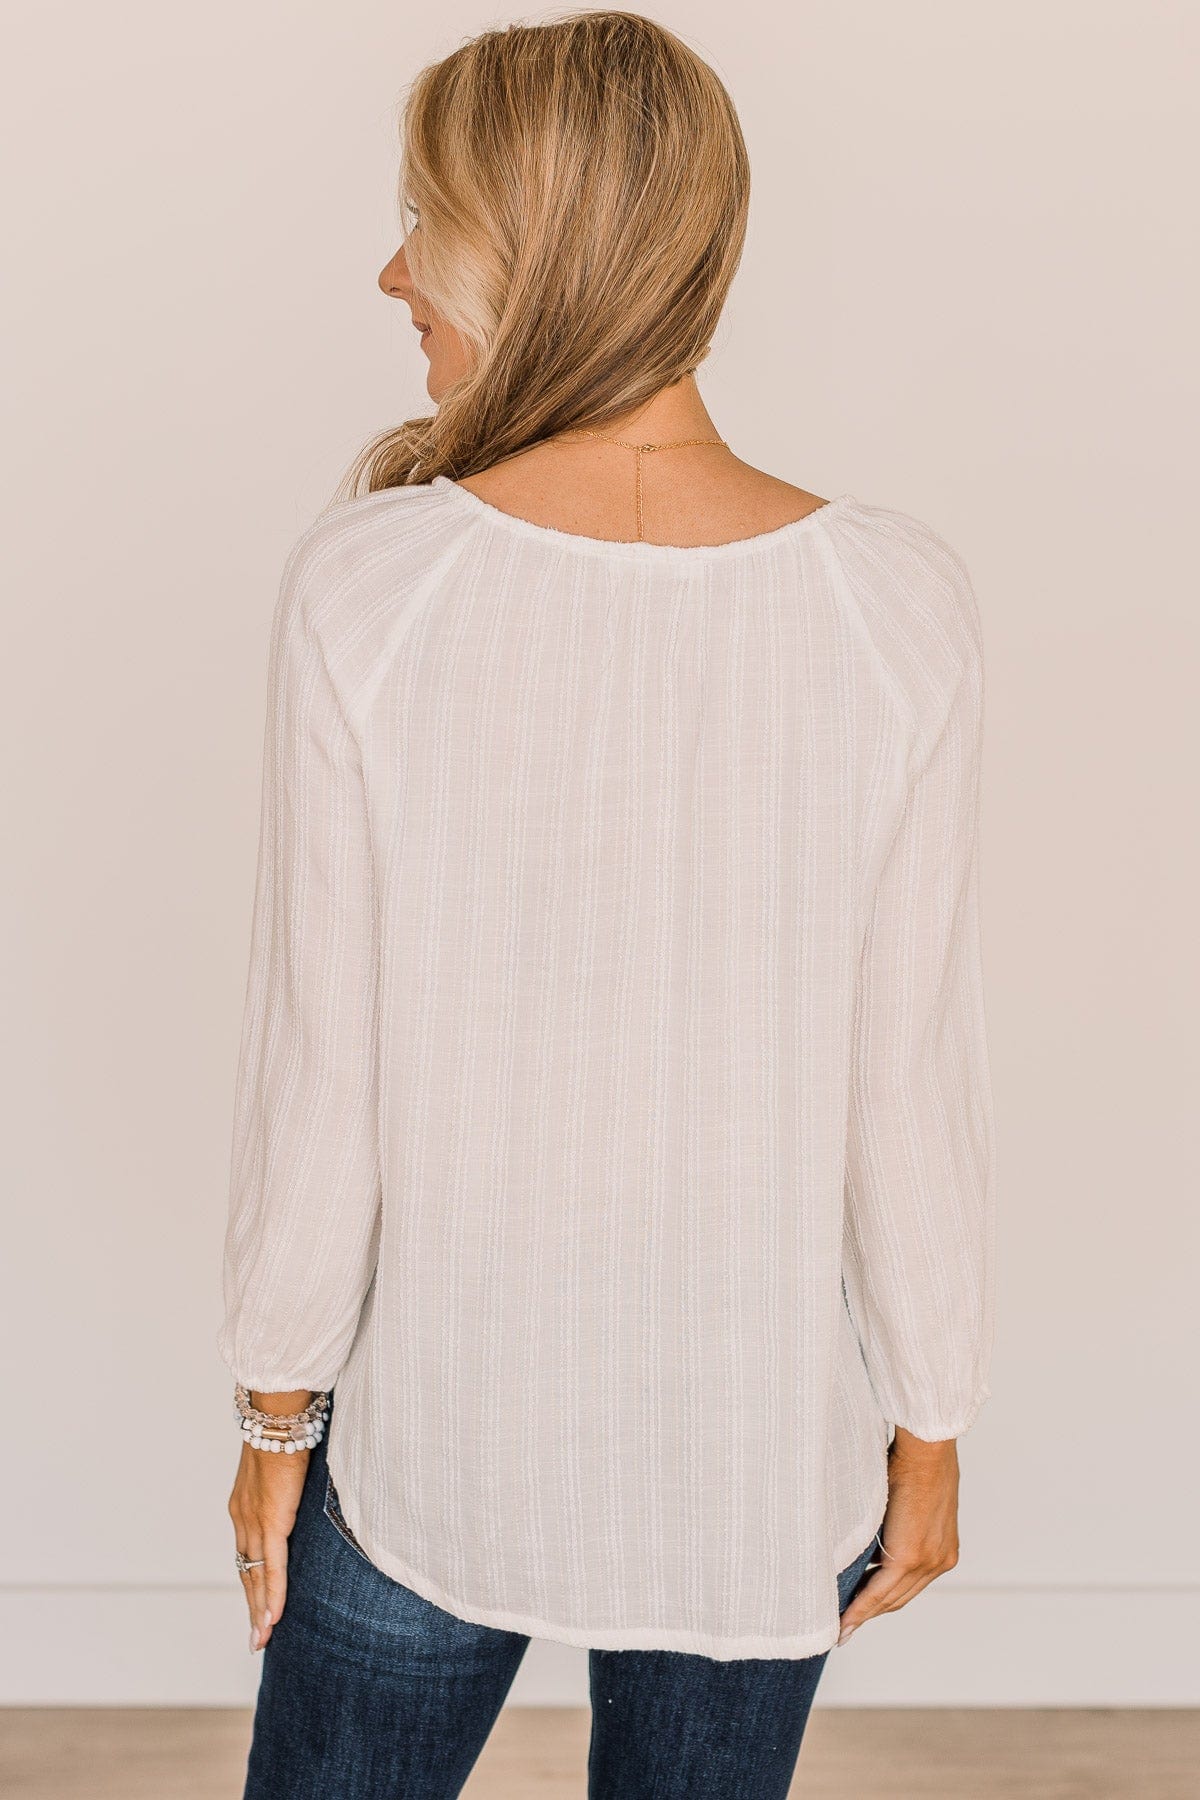 For The Record Striped Top- Ivory